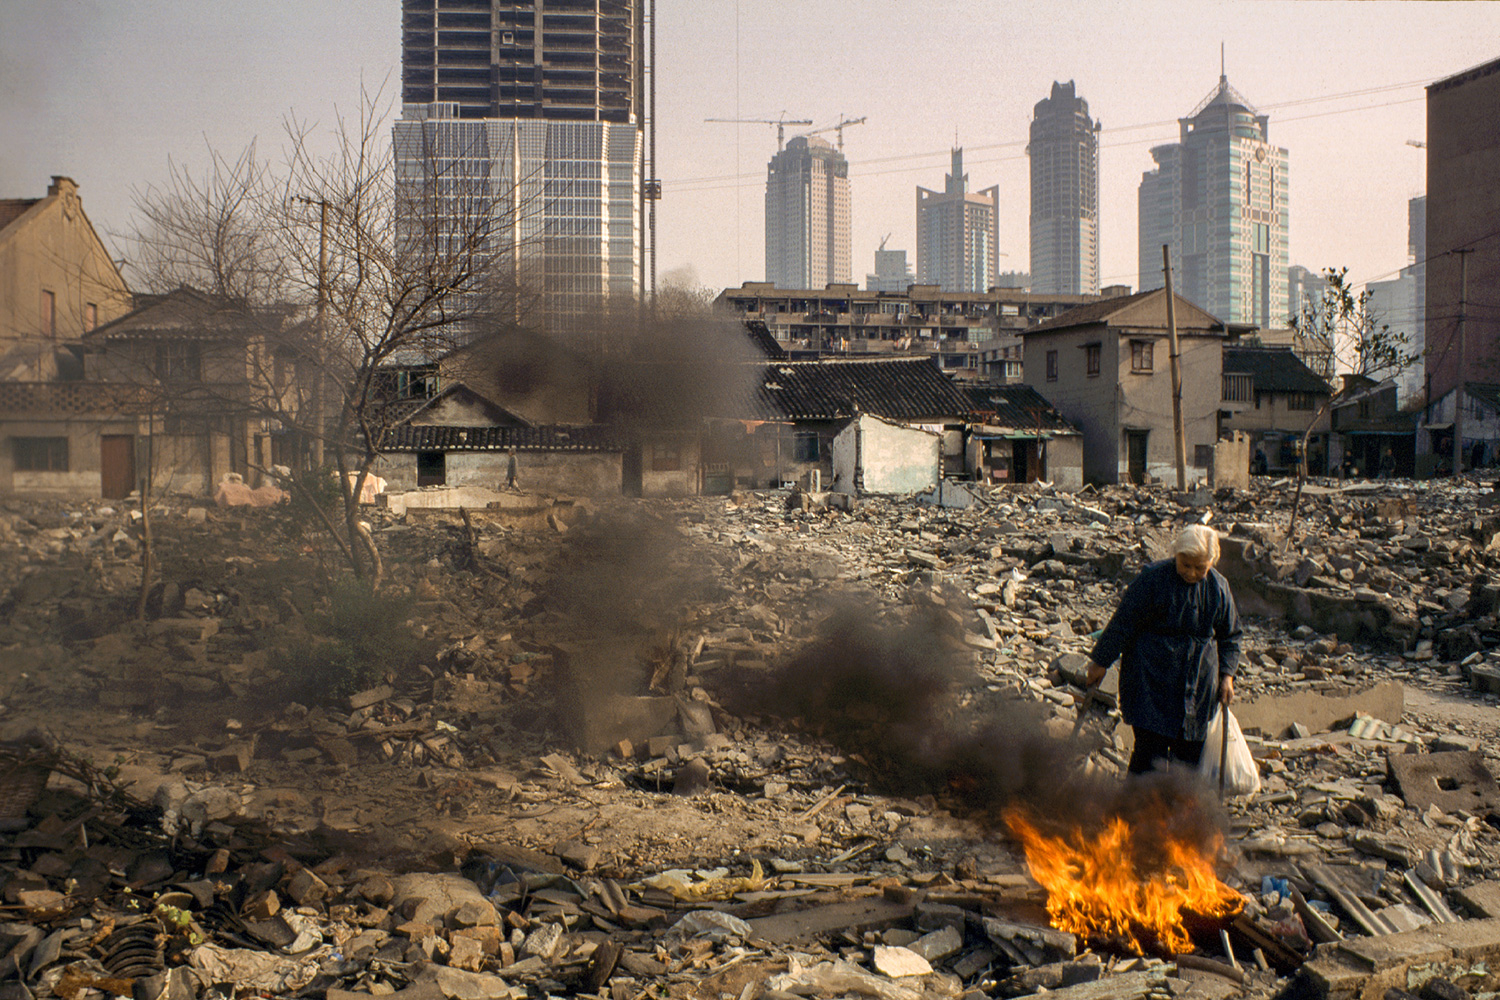 Preparing to vacate her home, an elderly resident burns discarded personal items, 1997.